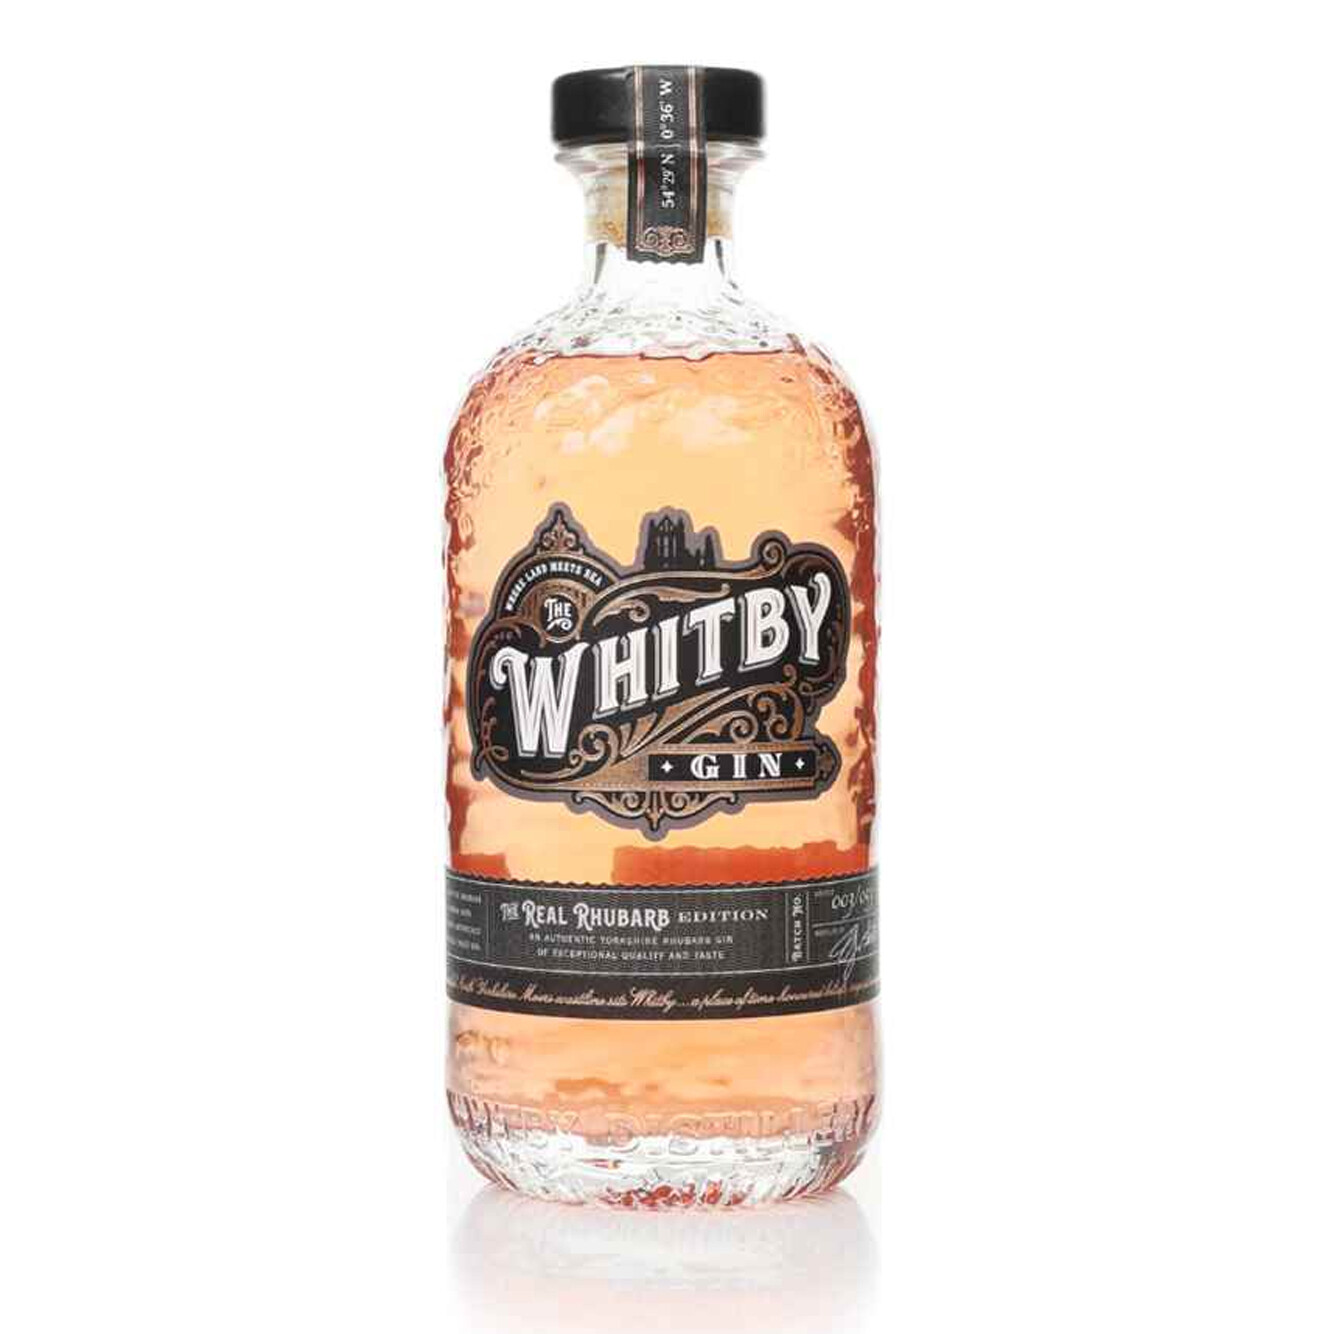 The Whitby Real Rhubarb Gin